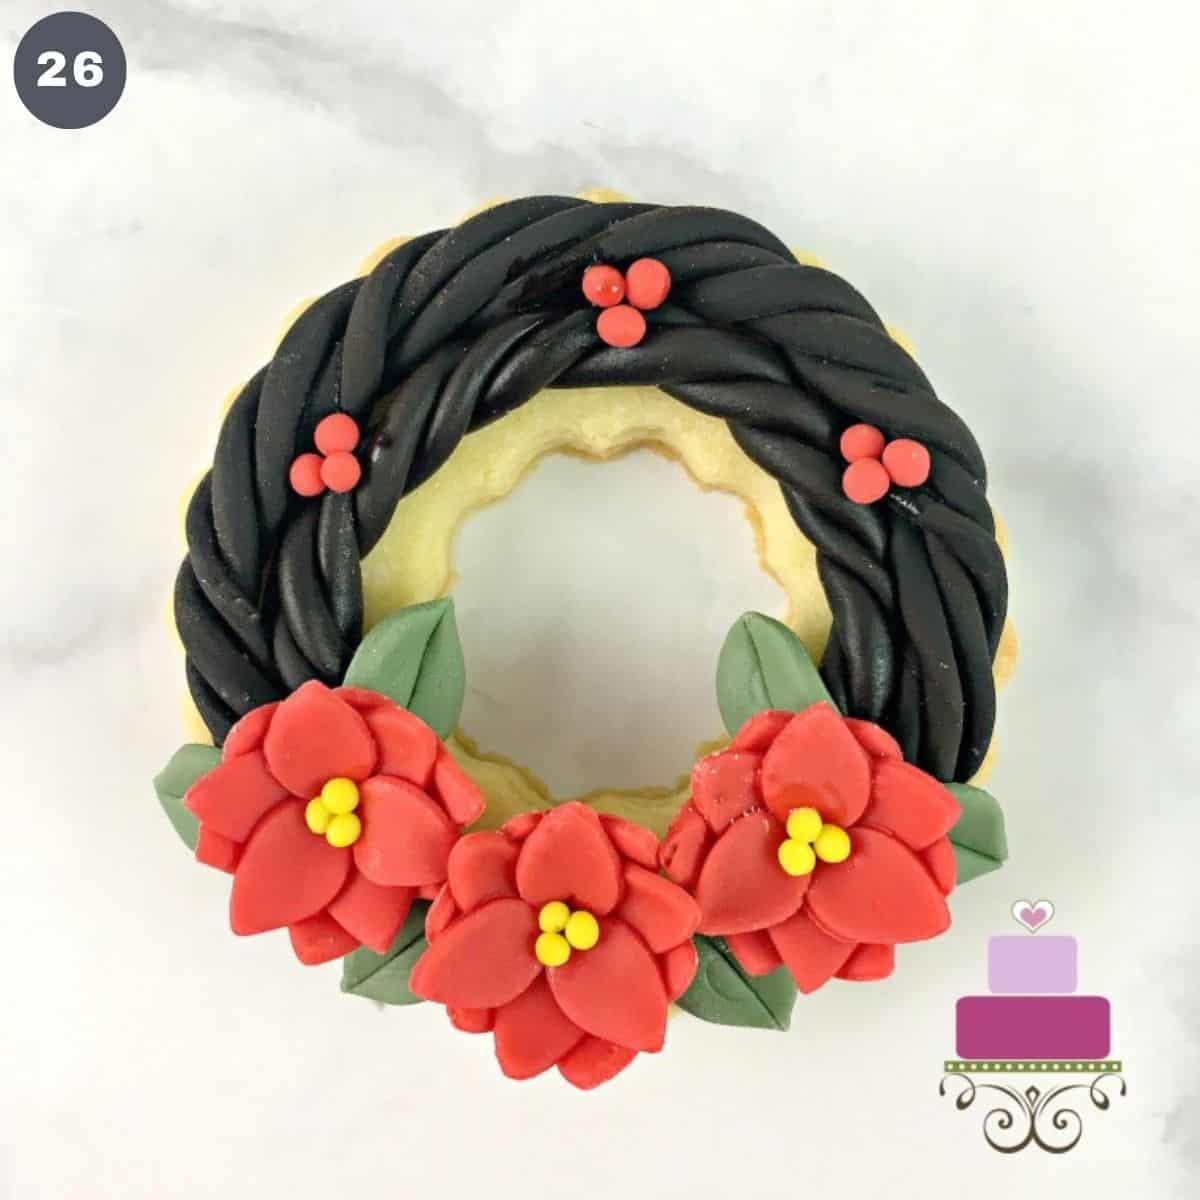 A ring shaped cookie decorated into a wreath with poinsettia flowers and holly berries.